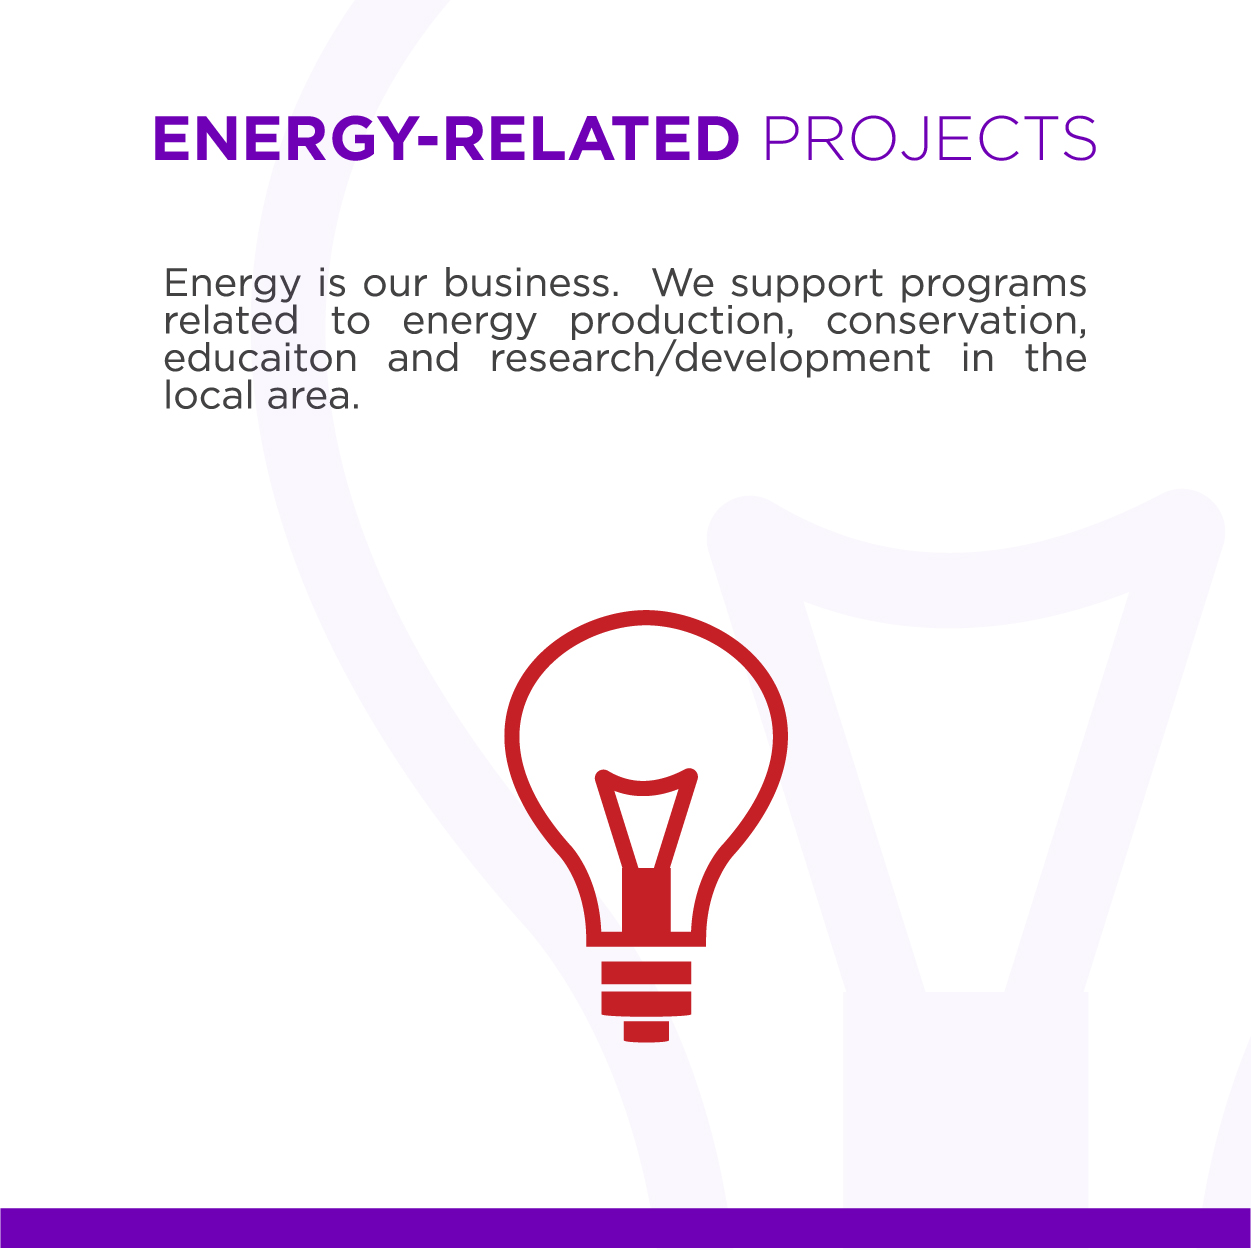 Energy-Related Projects Energy is our business. We support programs related to energy production, efficiency, education, research and development in the local area.